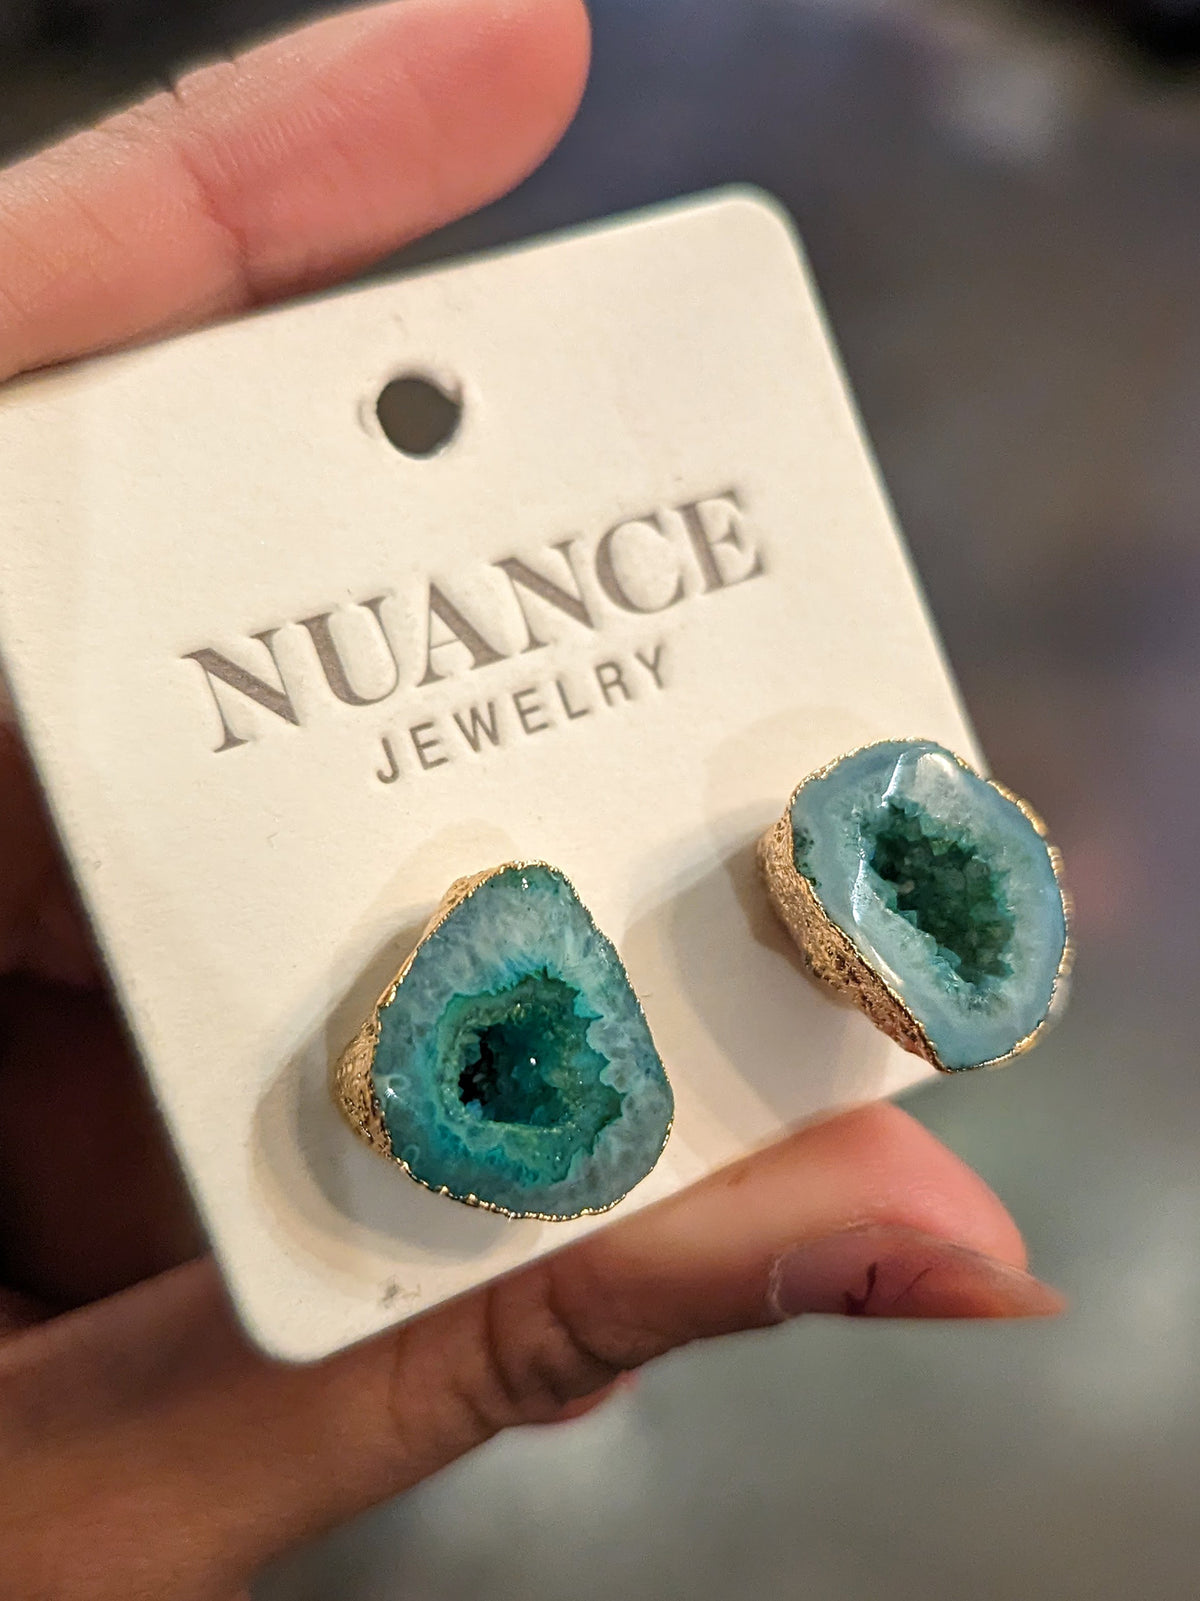 Nuance Teal Geode Studs | One of a Kind